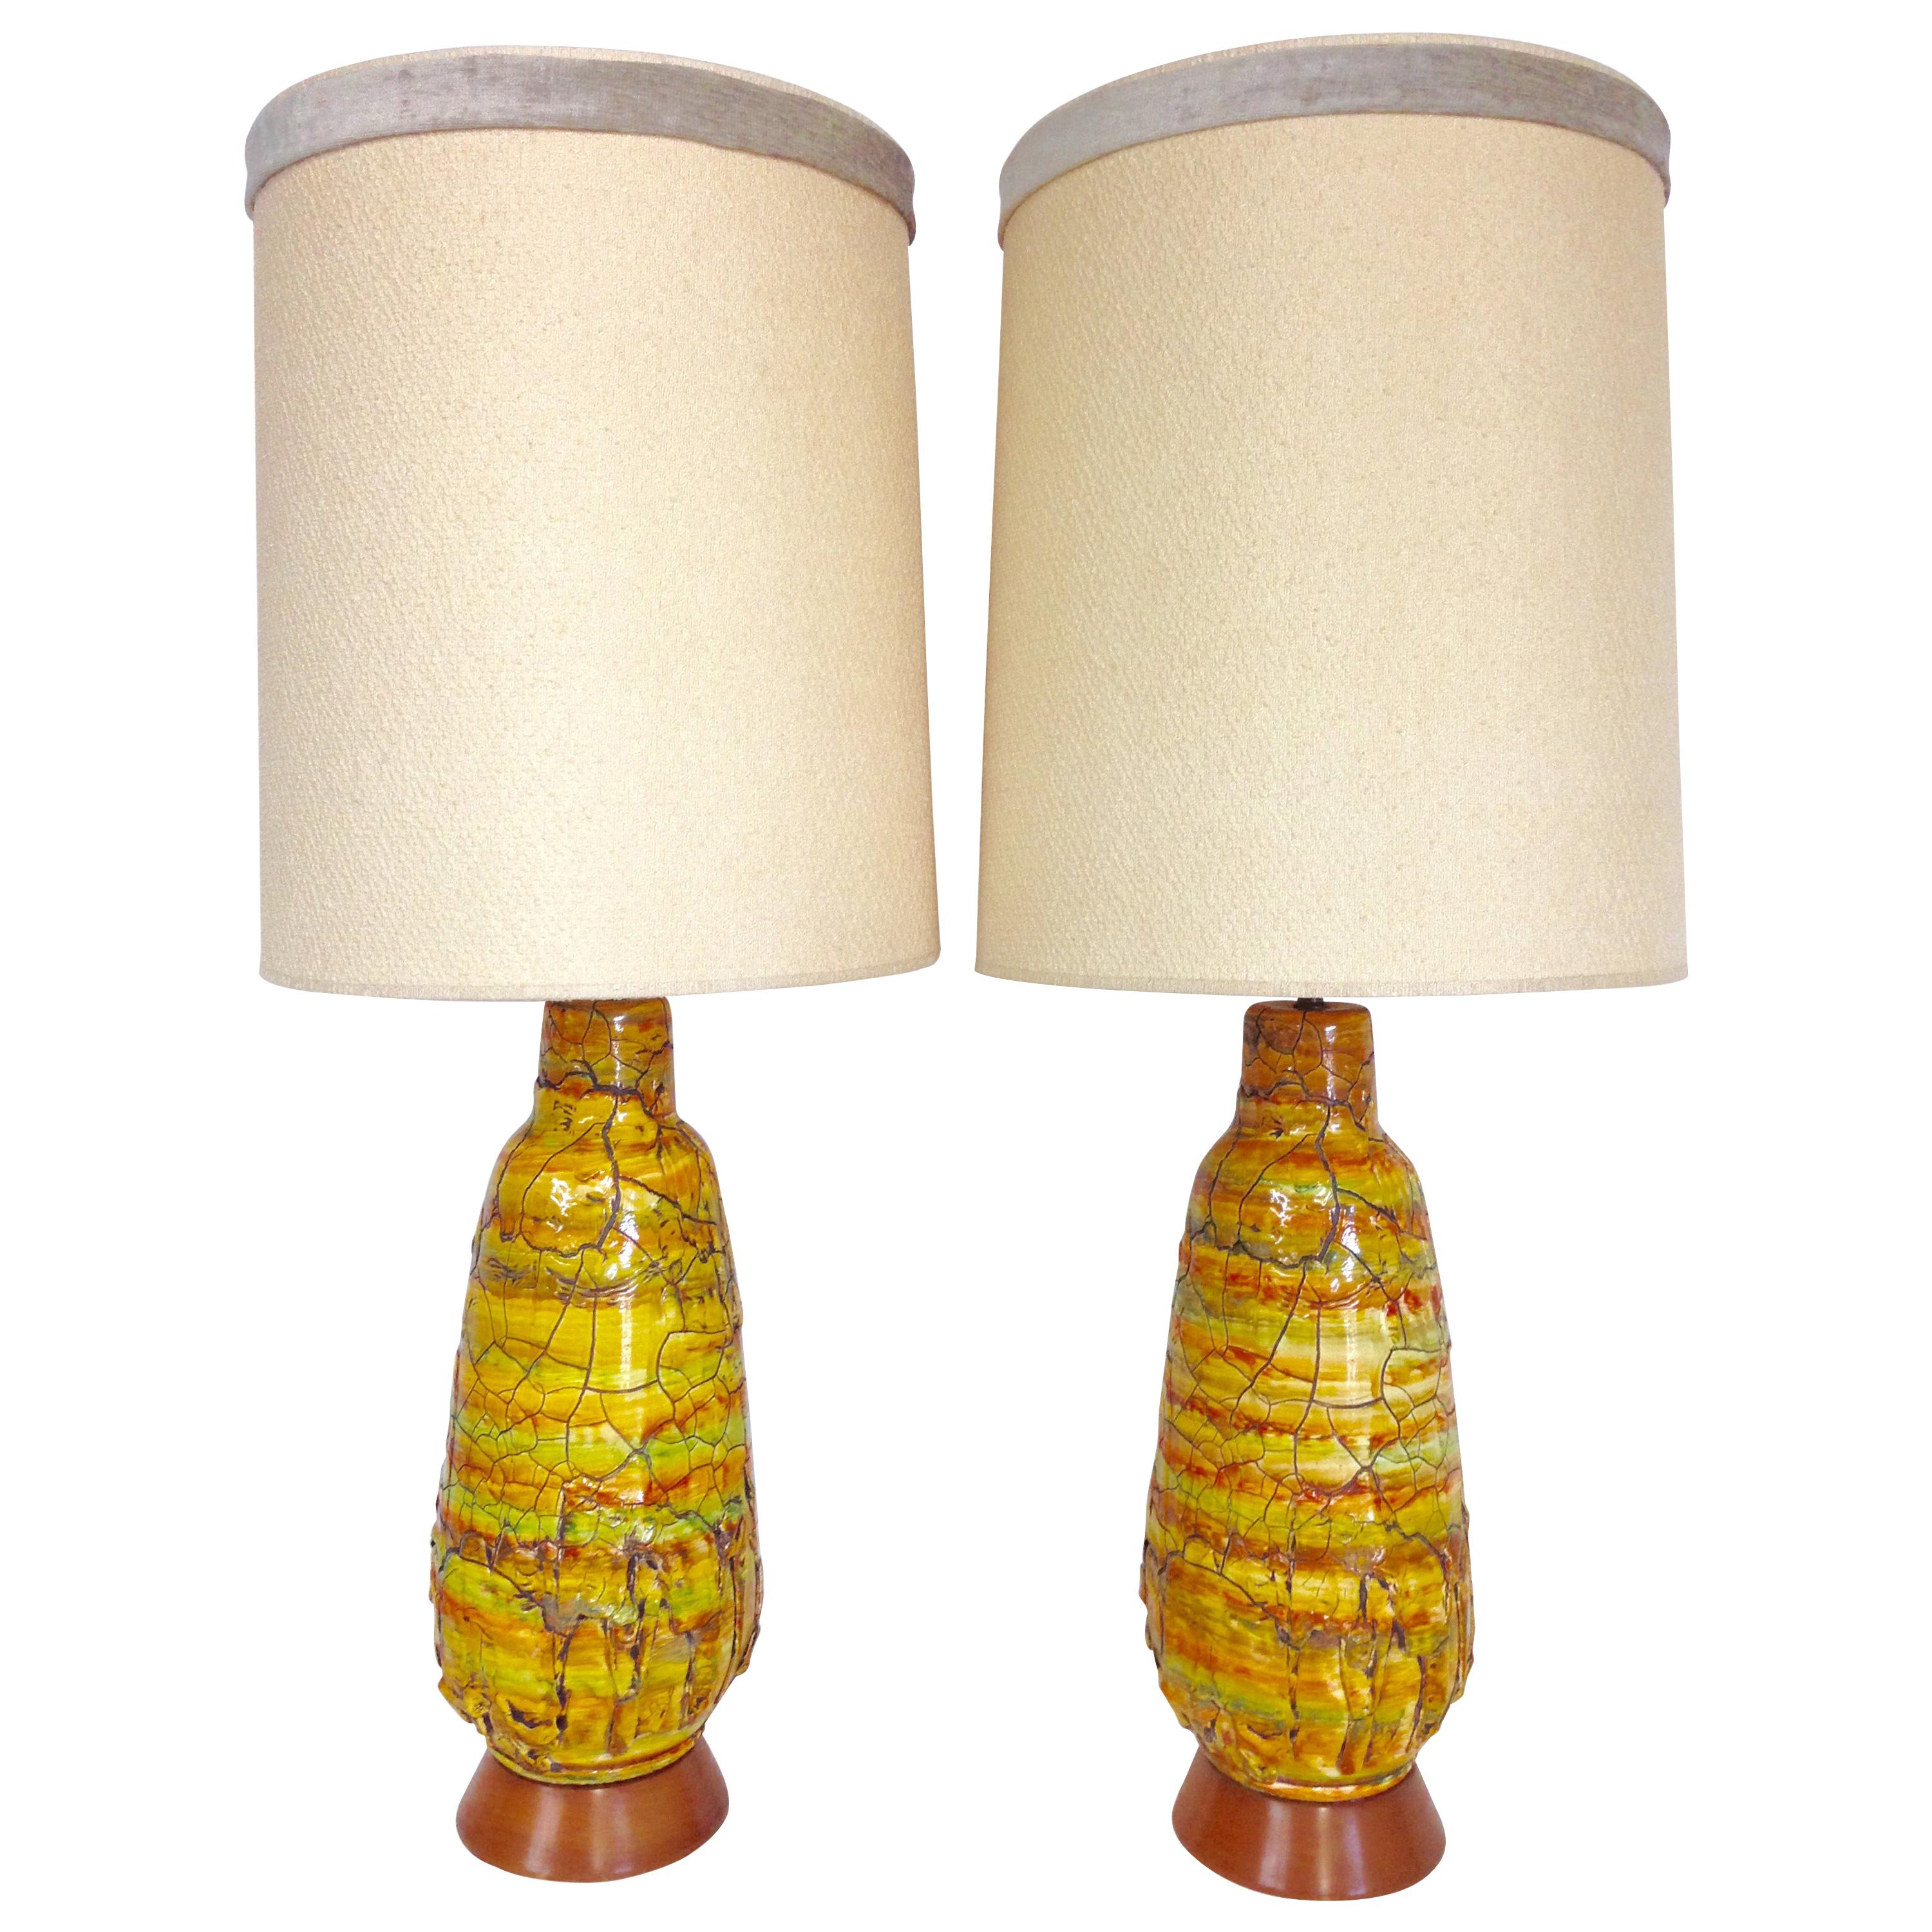 Midcentury Pair of Monumental Chalkware Glaze "Lava" Lamps By, F.A.I.P.